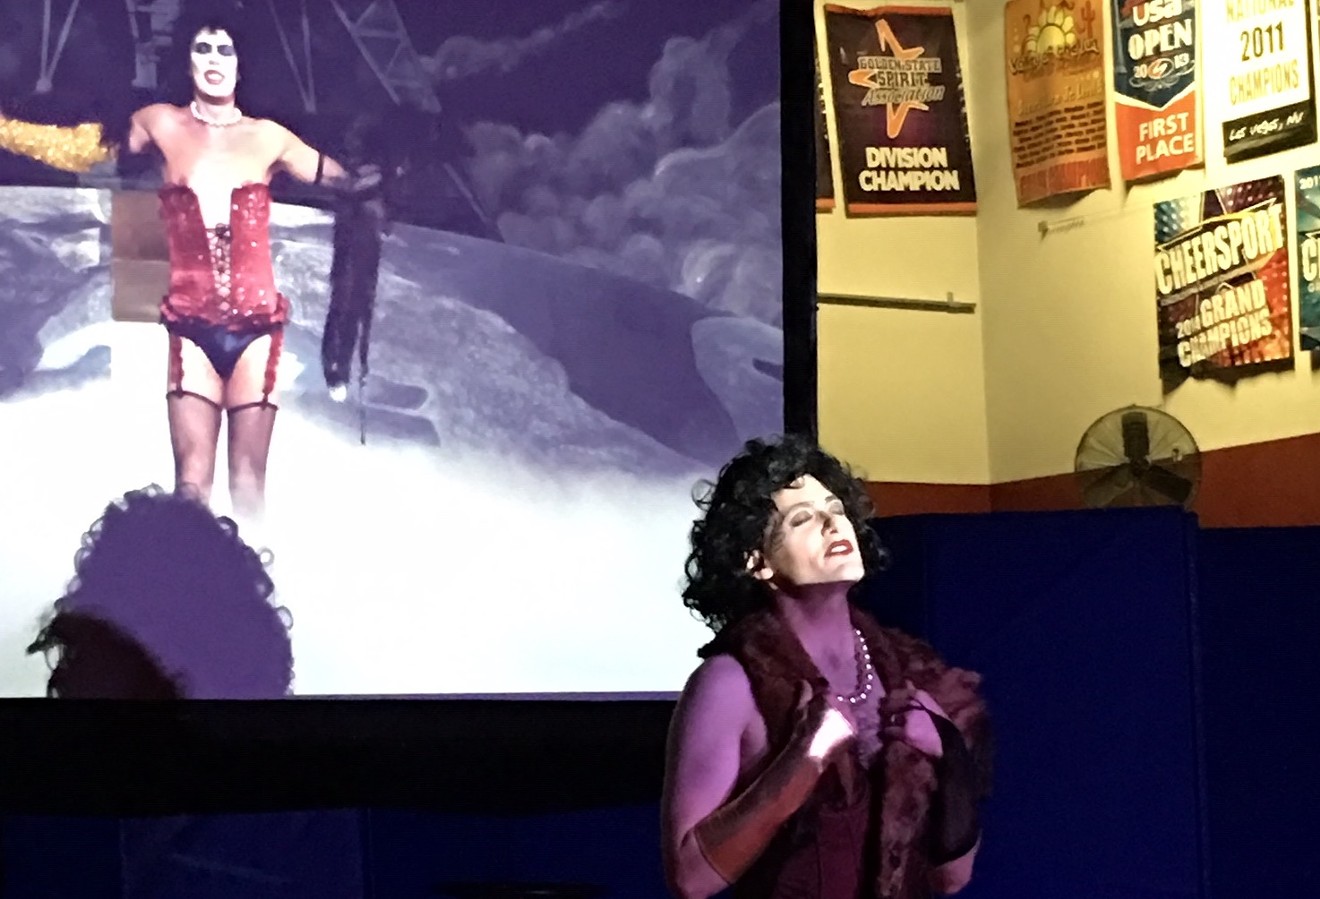 Mike Potts released his inner Frank N. Furter at a recent Rocky Horror Picture Show shadow cast performance.